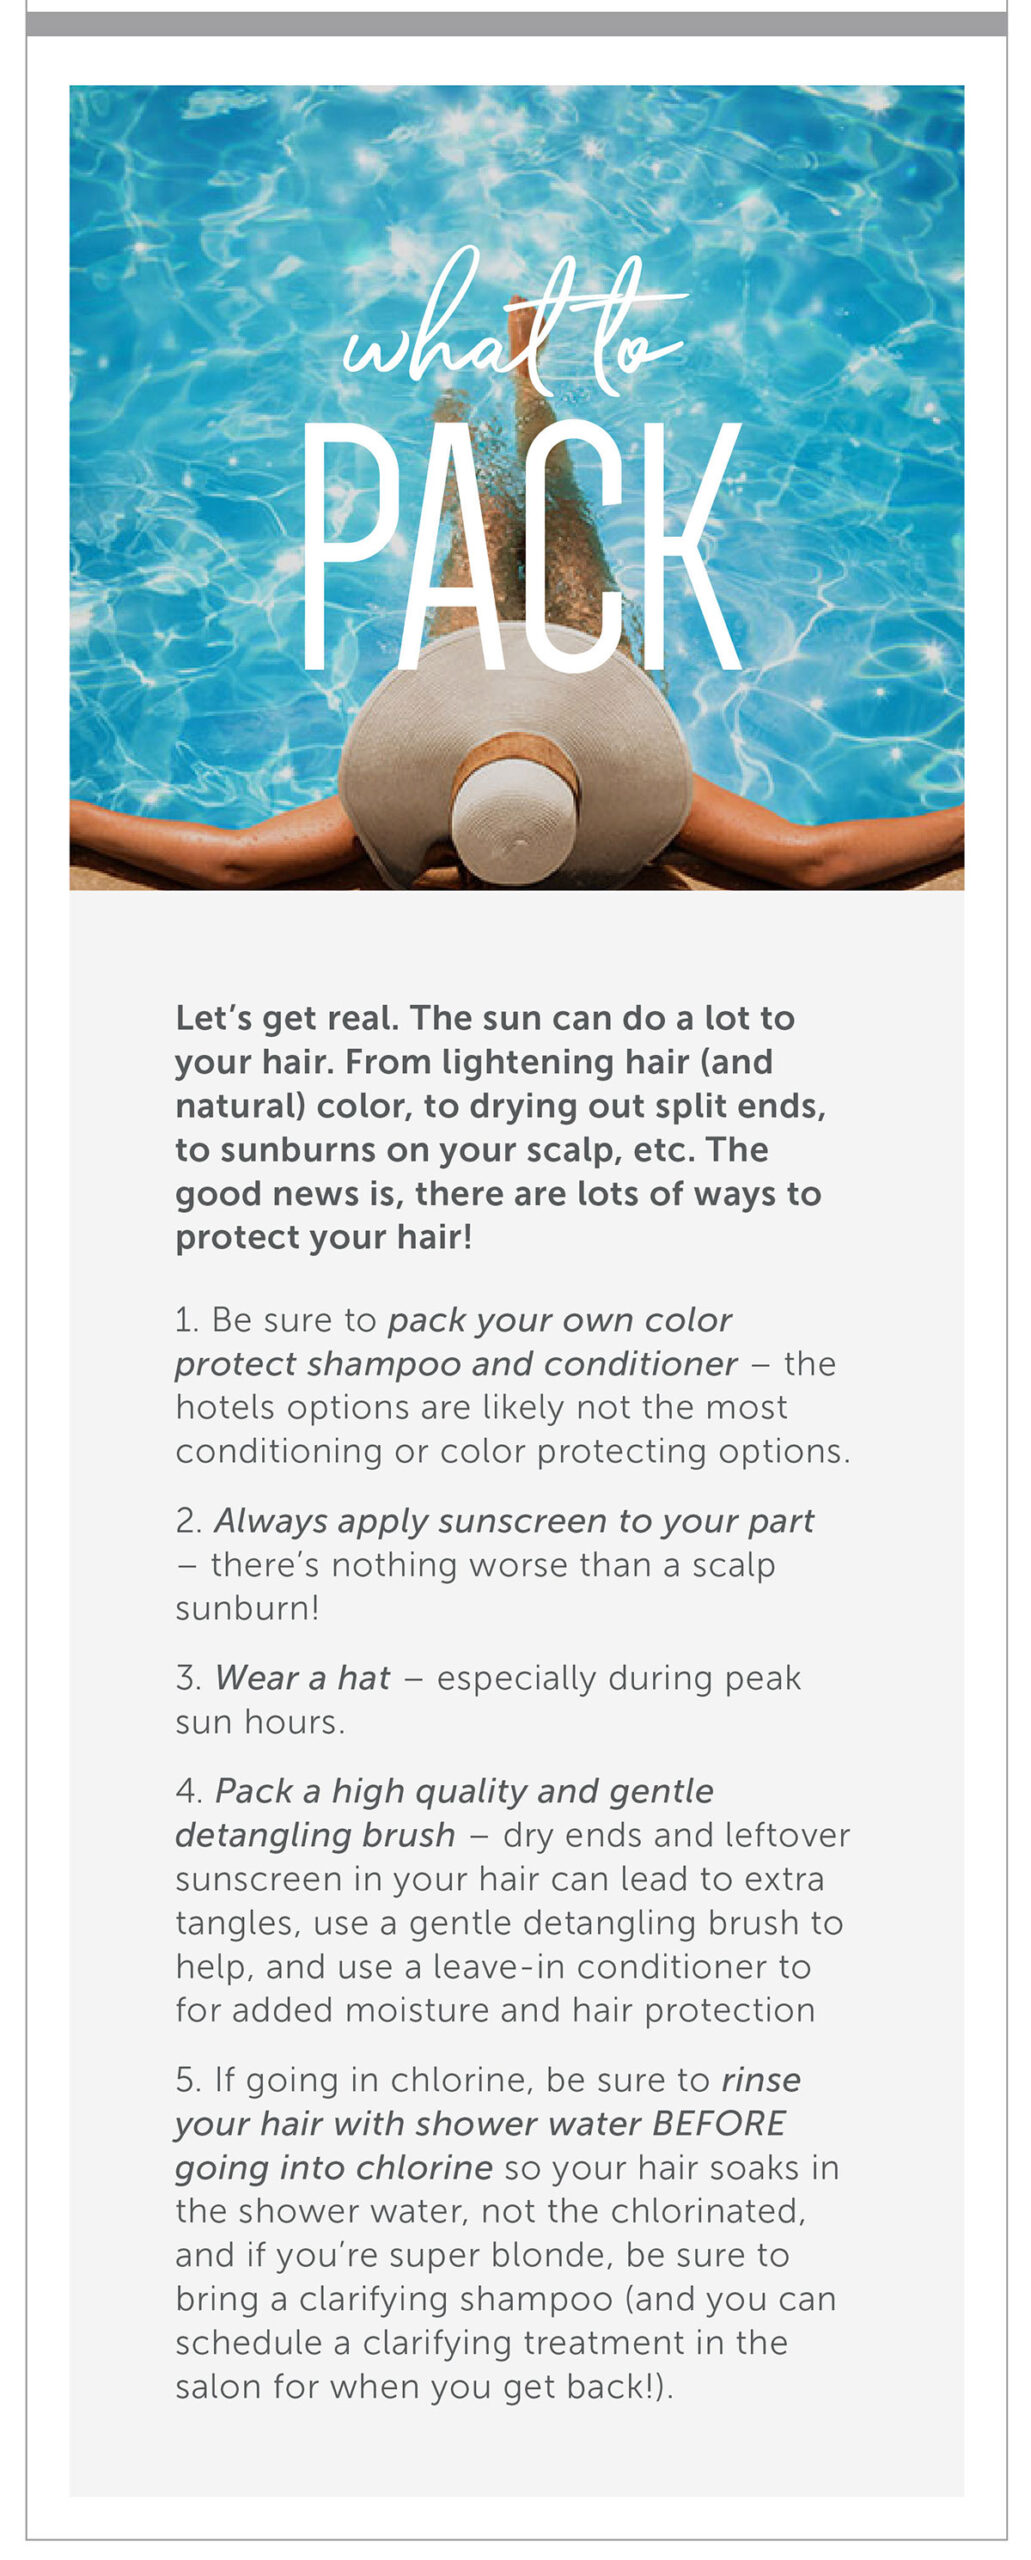 What to Pack: Hair Protection Let’s get real. The sun can do a lot to you hair. From lightening hair (and natural) color, to drying out split ends, to sunburns on your scalp, etc. The good news is-there are lots of ways to protect your hair! Be sure to pack your own color protect shampoo and conditioner- the hotels options are likely not the most conditioning or color protecting options. Always apply sunscreen to your part- there's nothing worse than a scalp sunburn! Wear a hat- especially during peak sun hours. Pack a high quality and gentle detangling brush- dry ends and leftover sunscreen in your hair can lead to extra tangles, use a gentle detangling brush to help, and use a leave-in conditioner to for added moisture and hair protection. If going in chlorine, be sure to rinse your hair with shower water BEFORE going into chlorine so your hair soaks in the shower water, not the chlorinated, and if you’re super blonde, be sure to bring a clarifying shampoo (and you can schedule a clarifying treatment in the salon for when you get back!). 